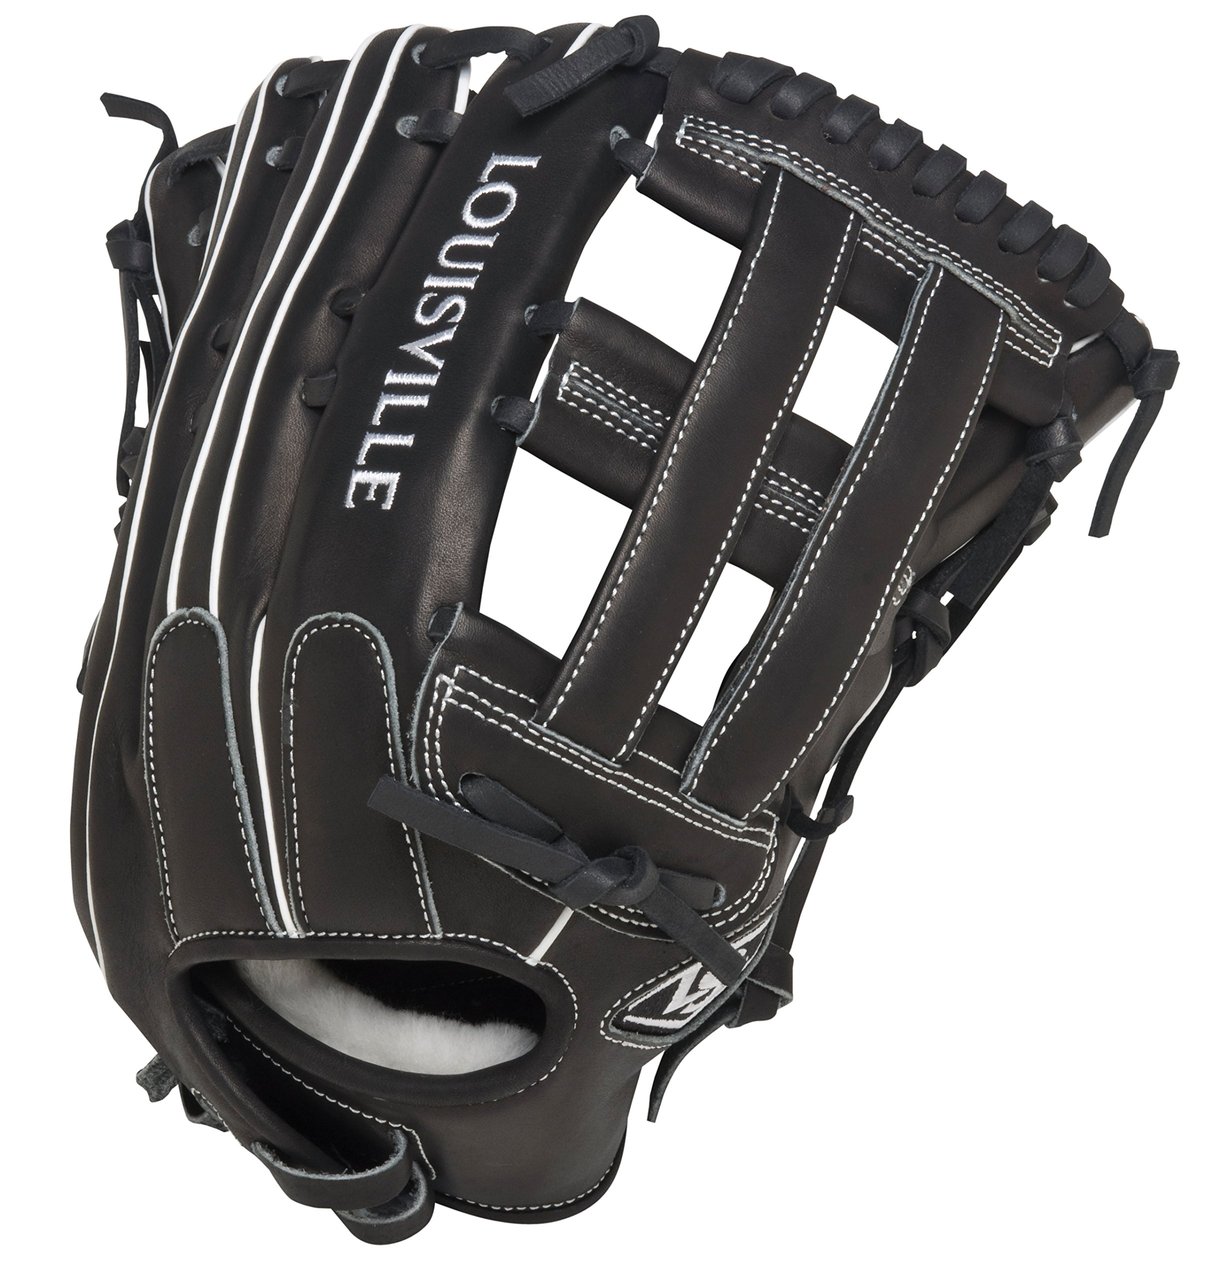 Louisville Slugger Super Z Black 13.5 inch Slow Pitch Softball Glove (Right Hand Throw) : The Super Z Series is the first of its kind in Slow Pitch. The unique Flare technology has up to 15% wider fielding surface vs. a traditional pattern allowing for quick-transfer of the ball from glove to hand, because every split second counts.